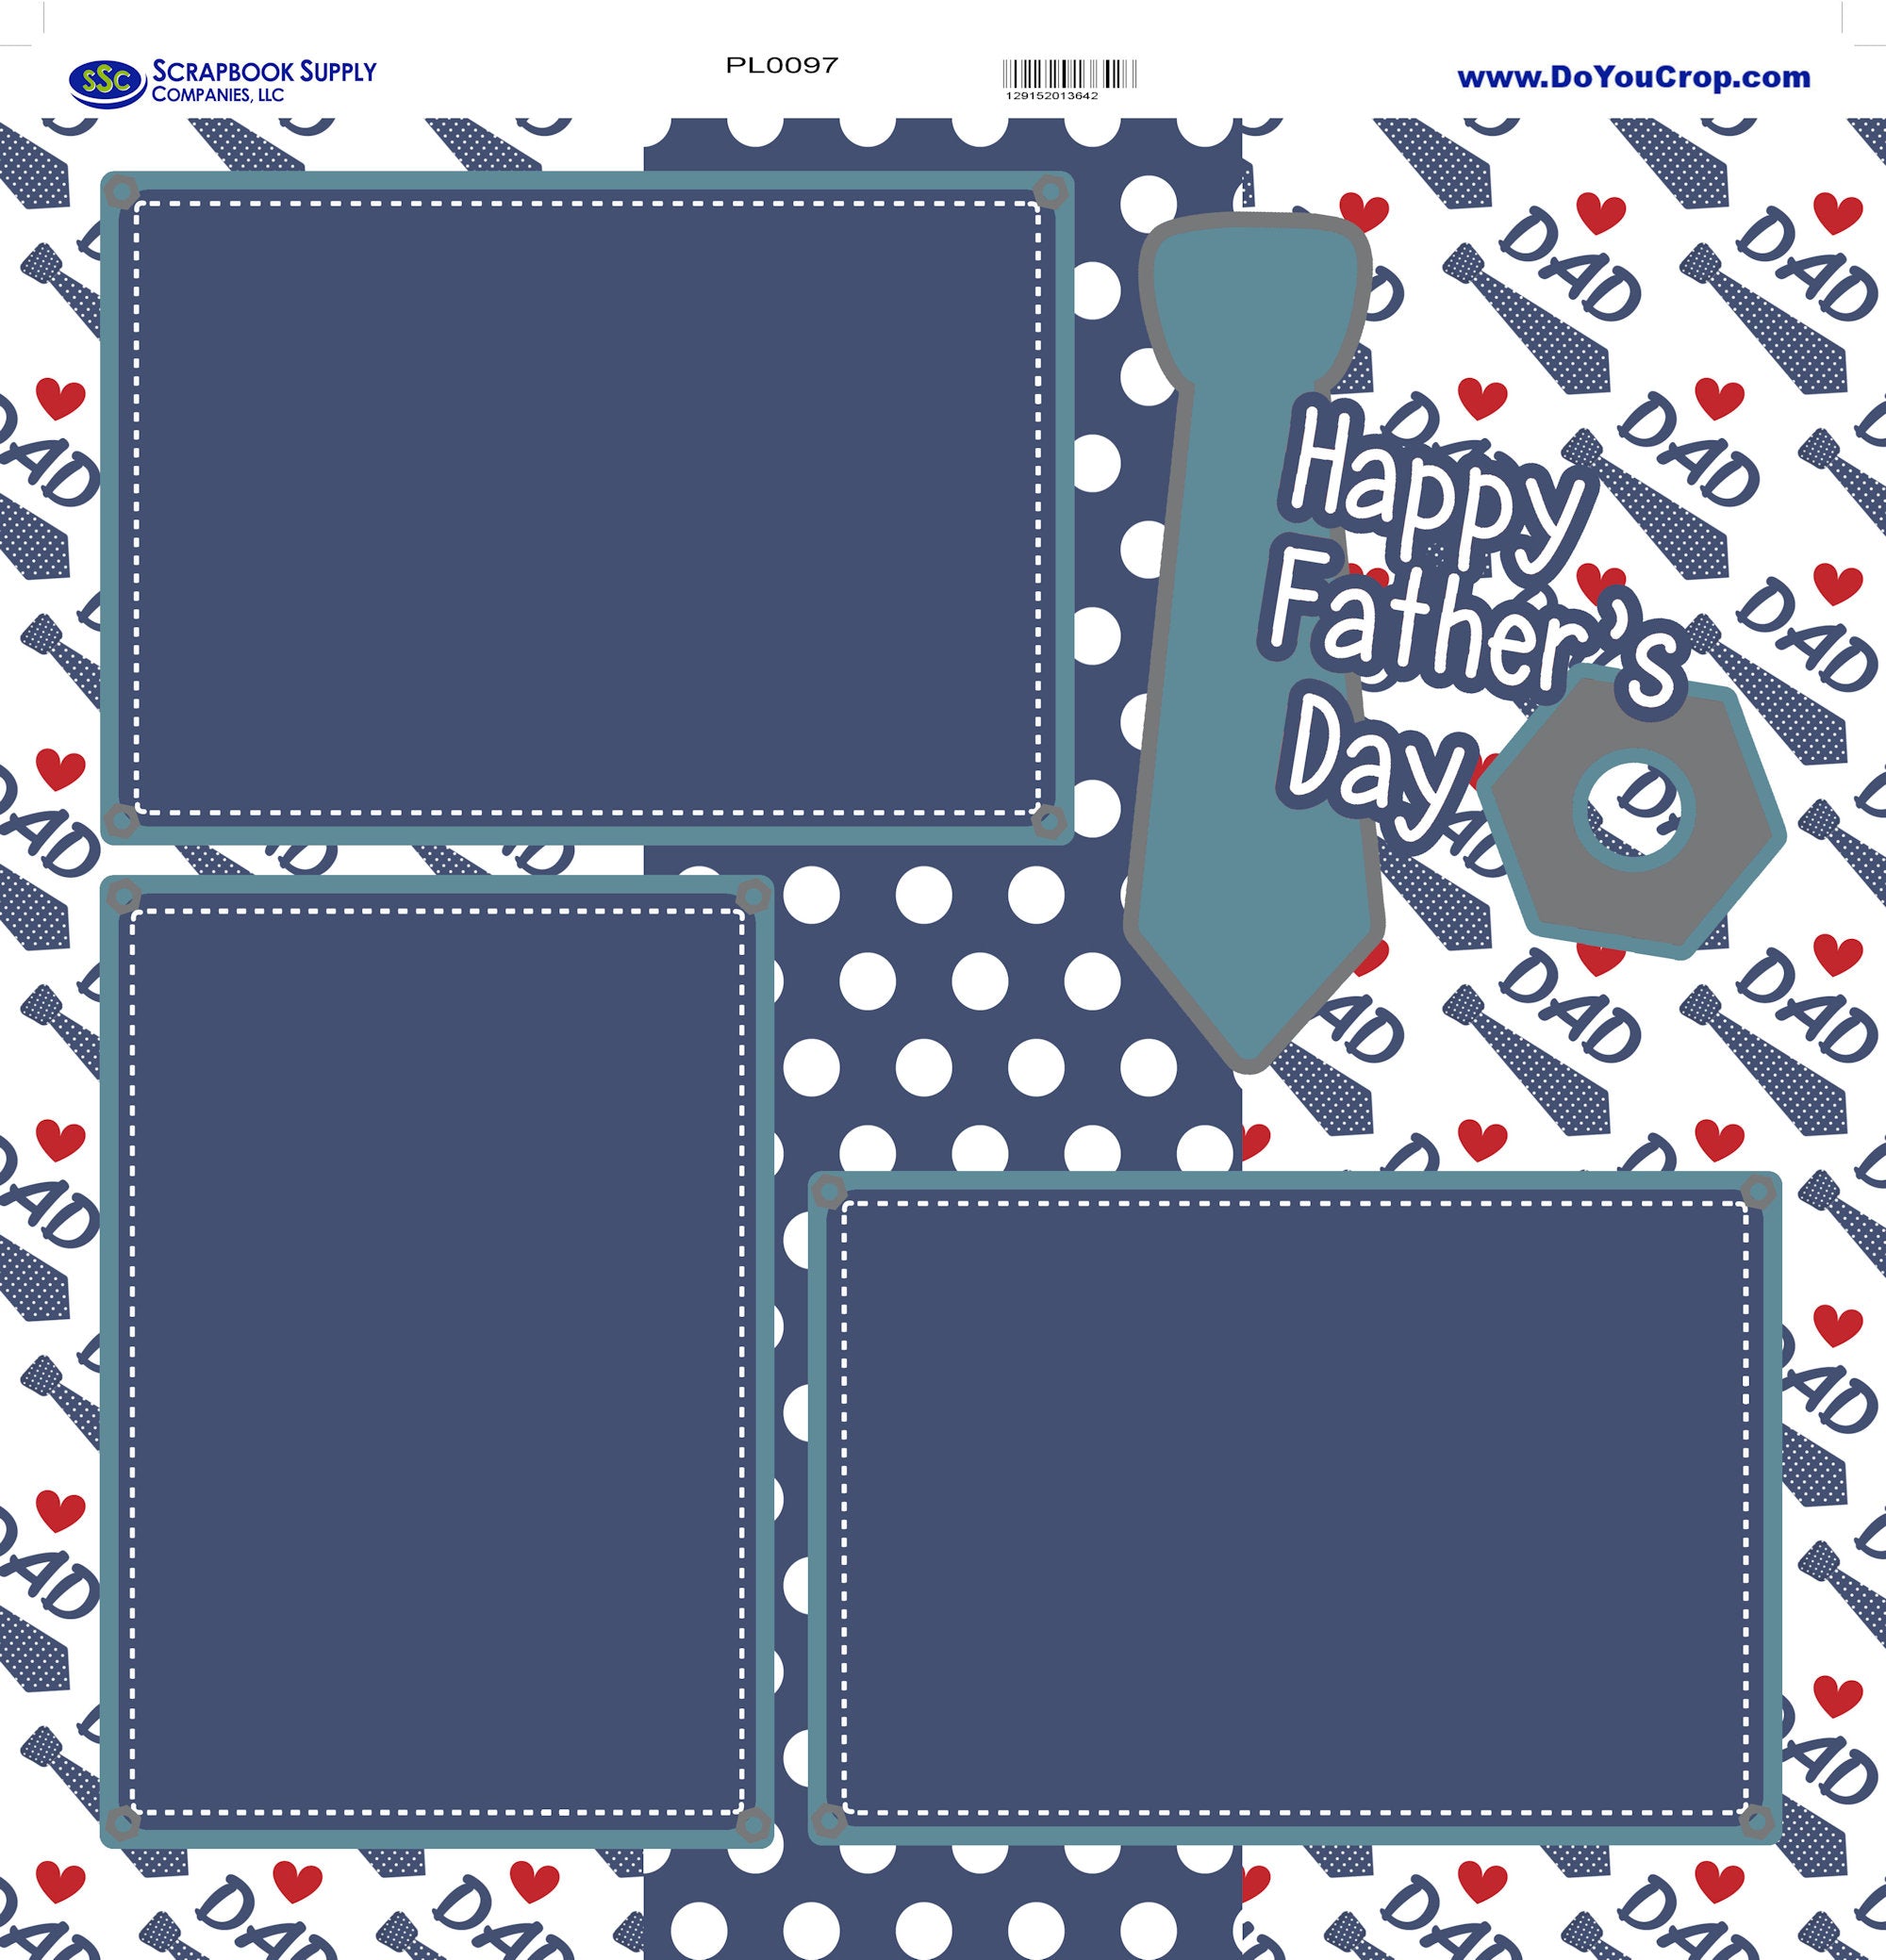 Happy Father's Day (2) - 12 x 12 Premade, Printed Scrapbook Pages by SSC Designs